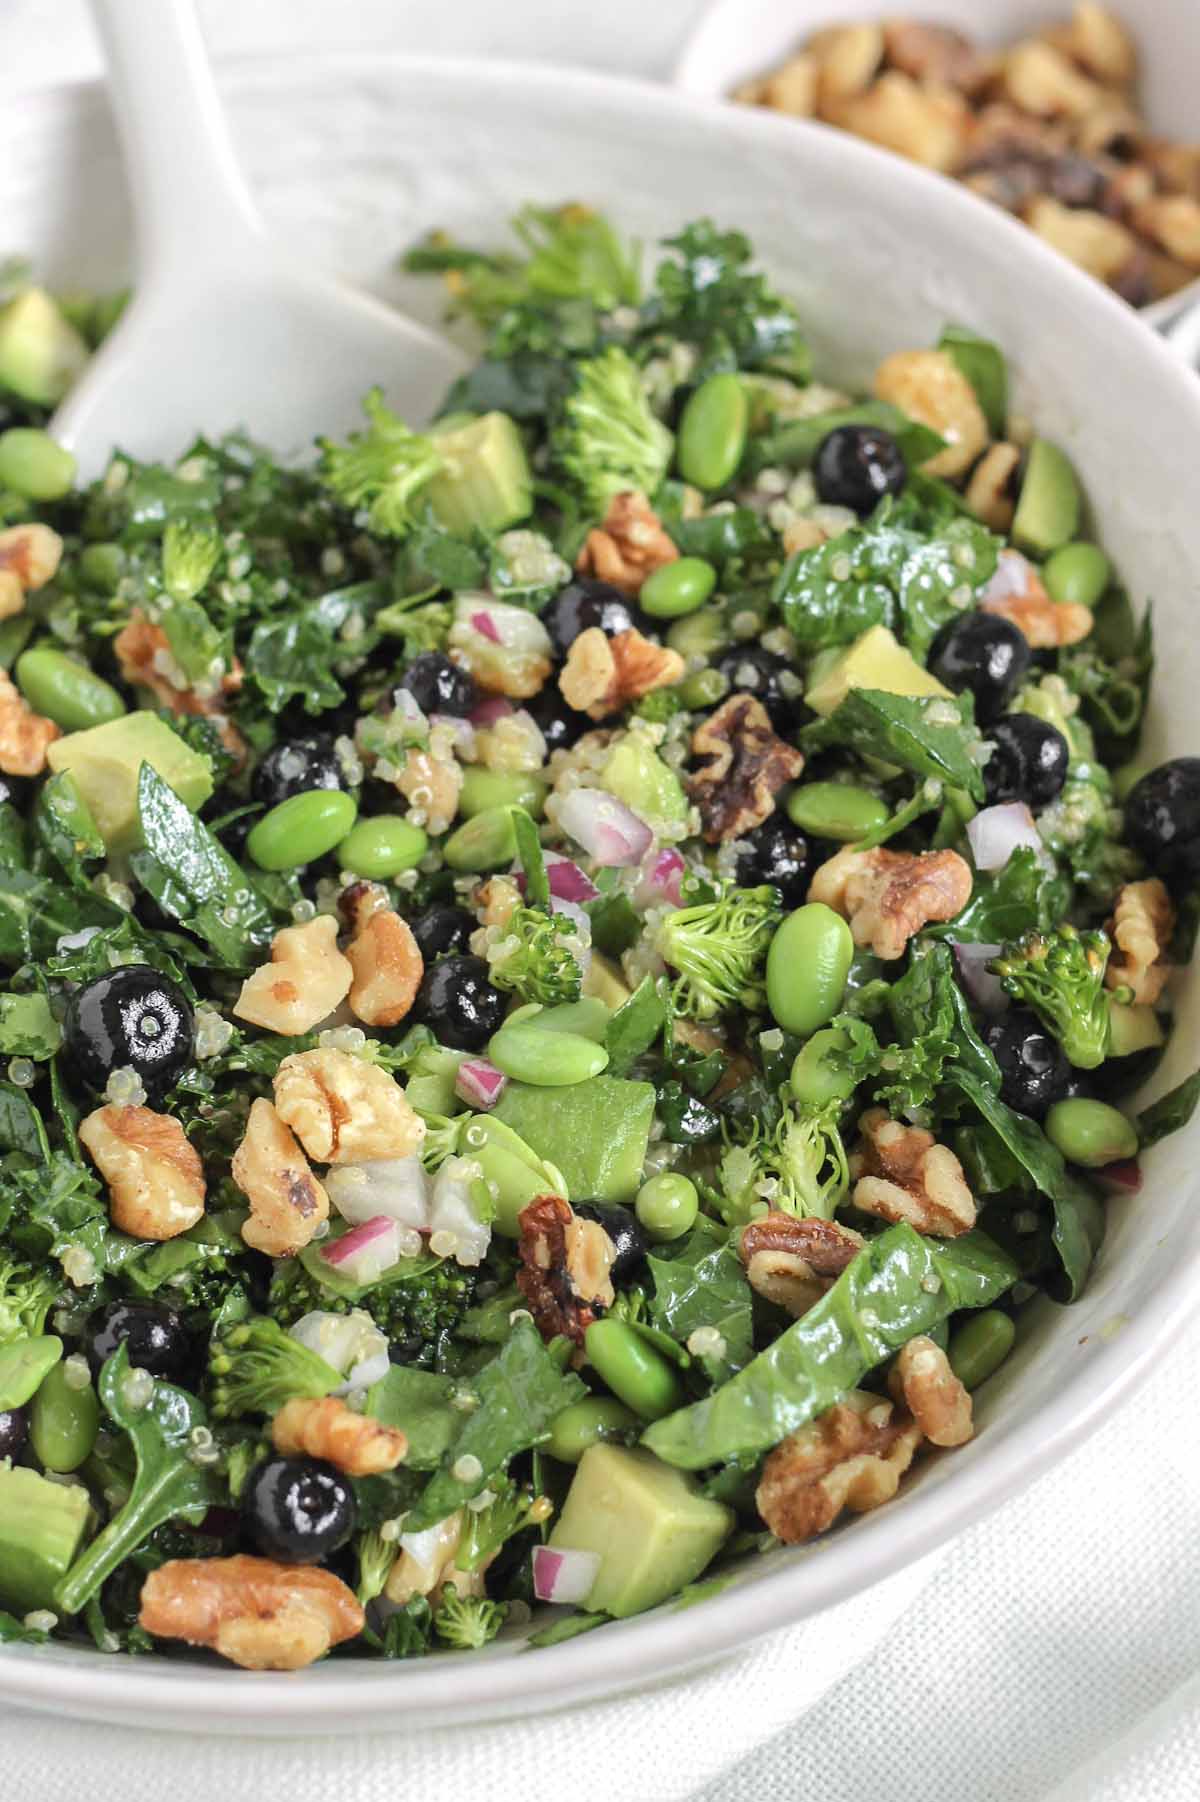 Superfood salad in a large white bowl with a white serving utensils and a bowl of walnuts in the background.